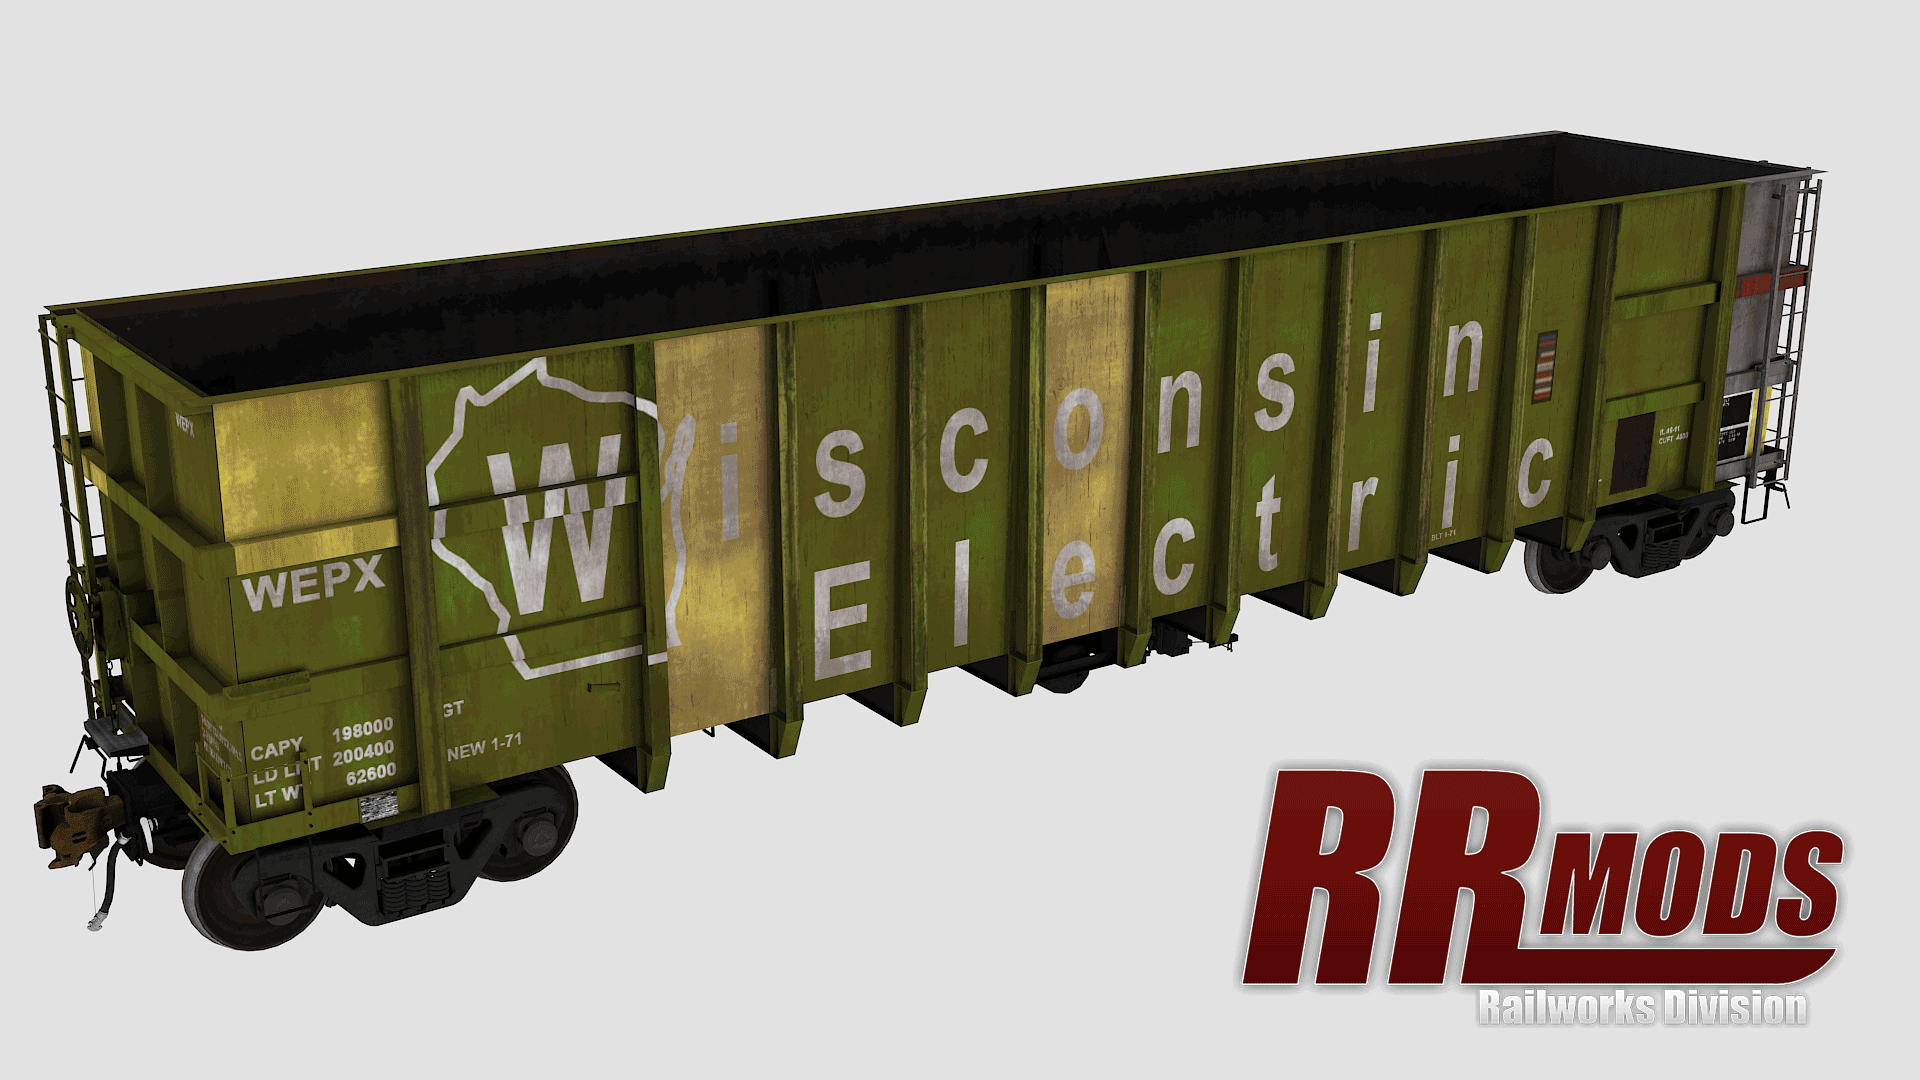 The wisconsim electric rail model